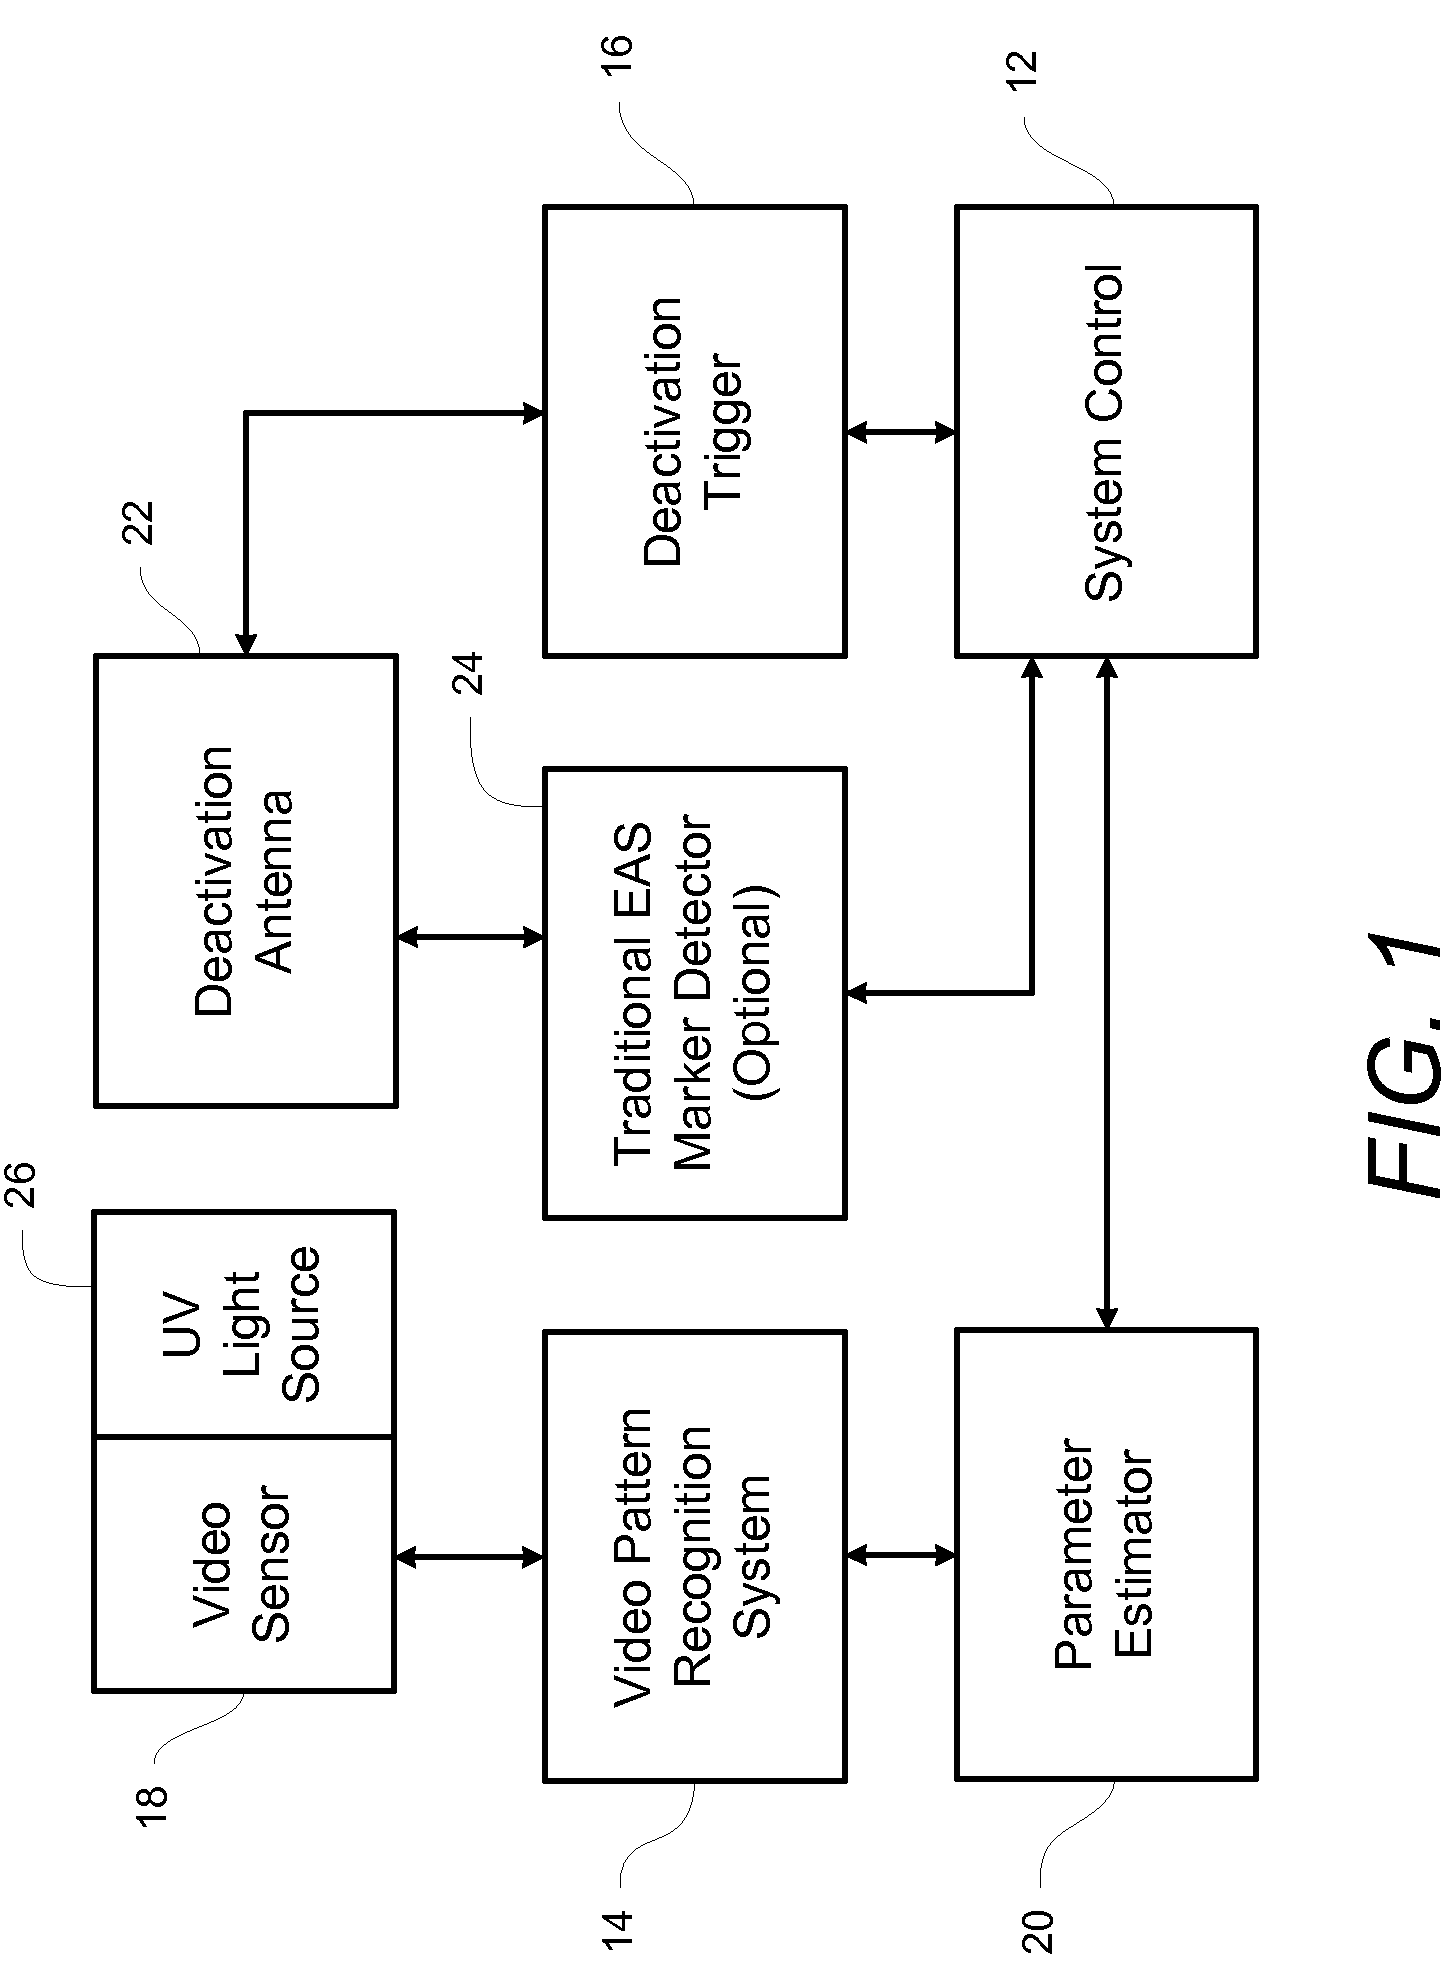 Electronic article surveillance deactivator using visual pattern recognition system for triggering